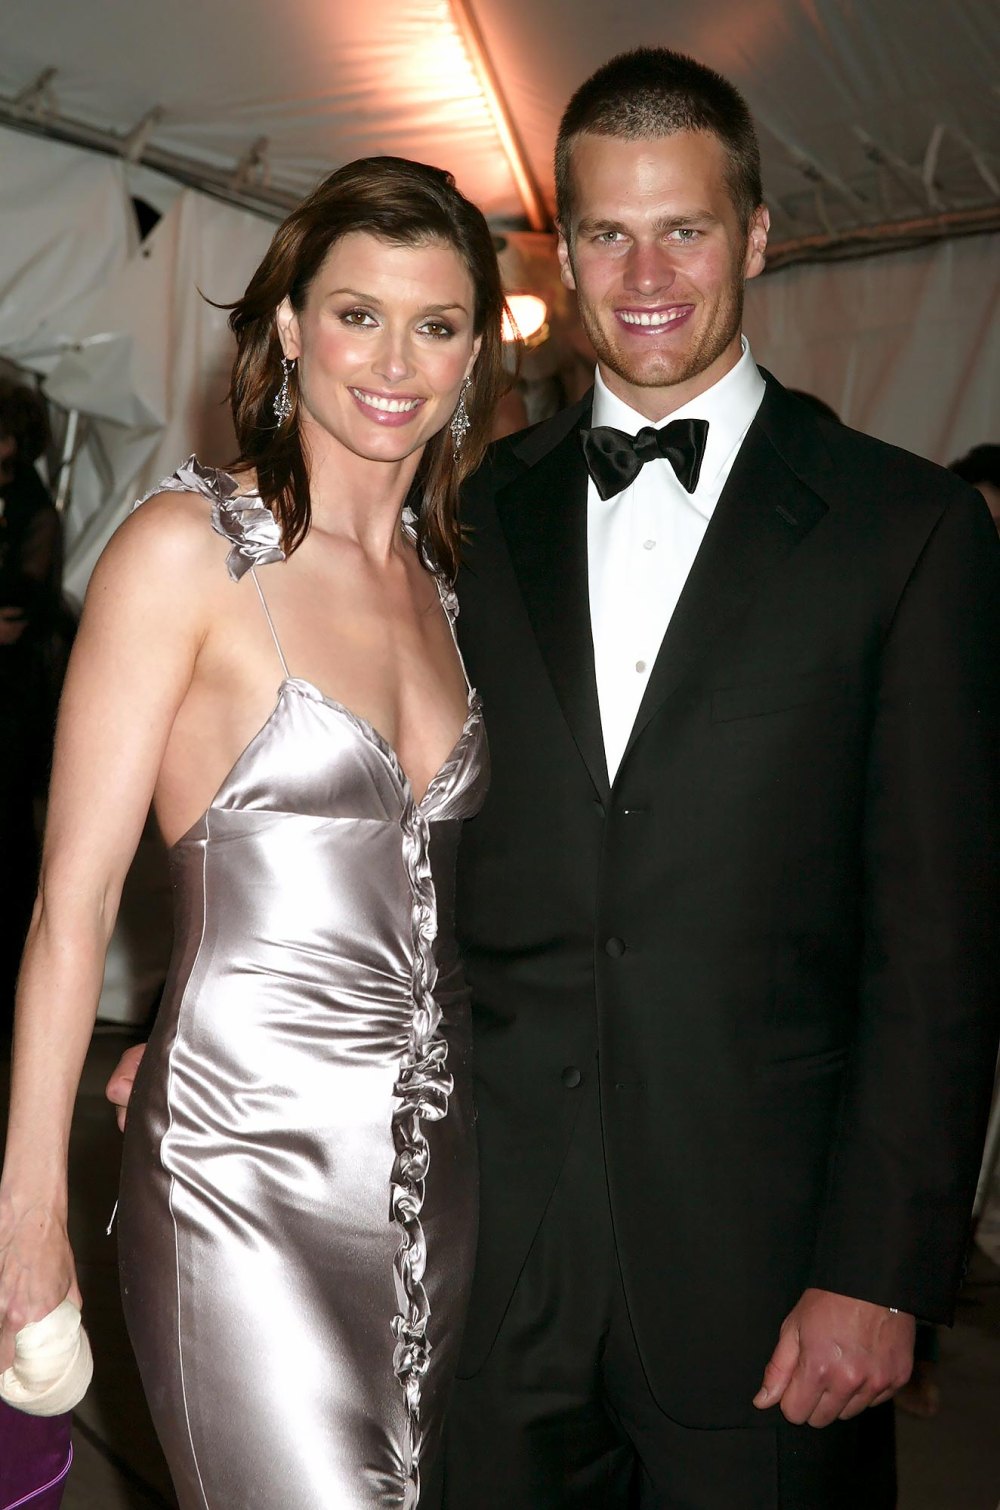 Bridget Moynahan Posts About Loyalty After Tom Brady Roast: ‘Never Would’ve Did That S–t to You’